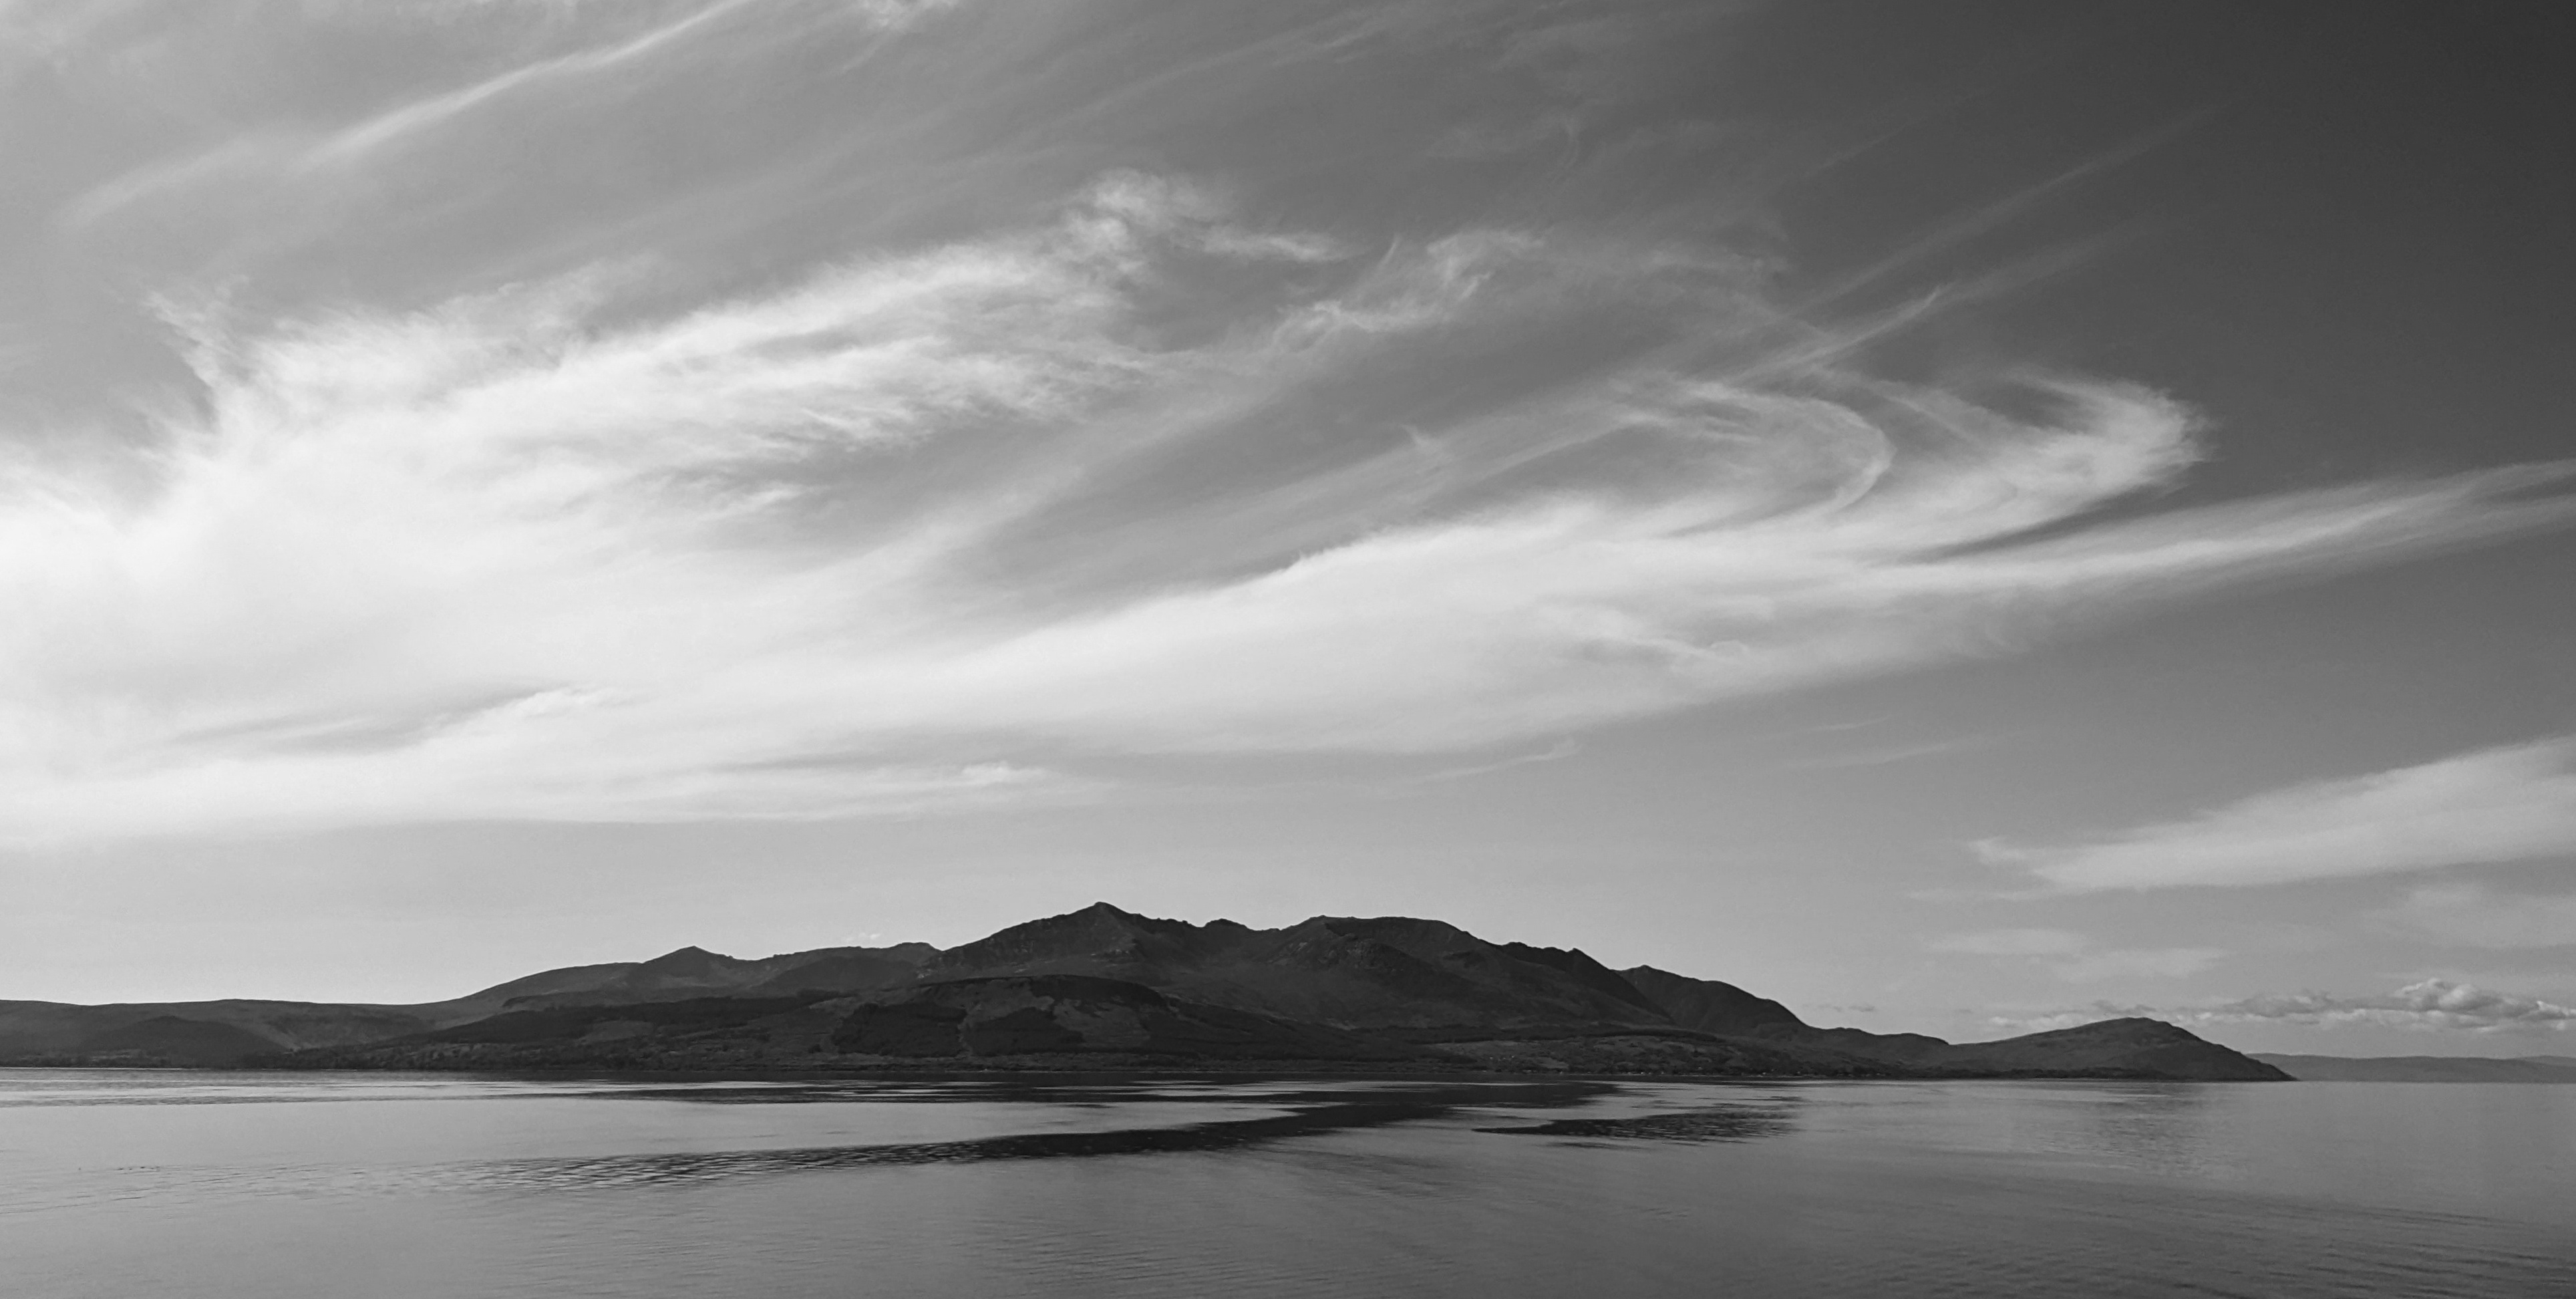 The skyline of Arran - known as 'The Sleeping Warrior' - as seen from the coast.